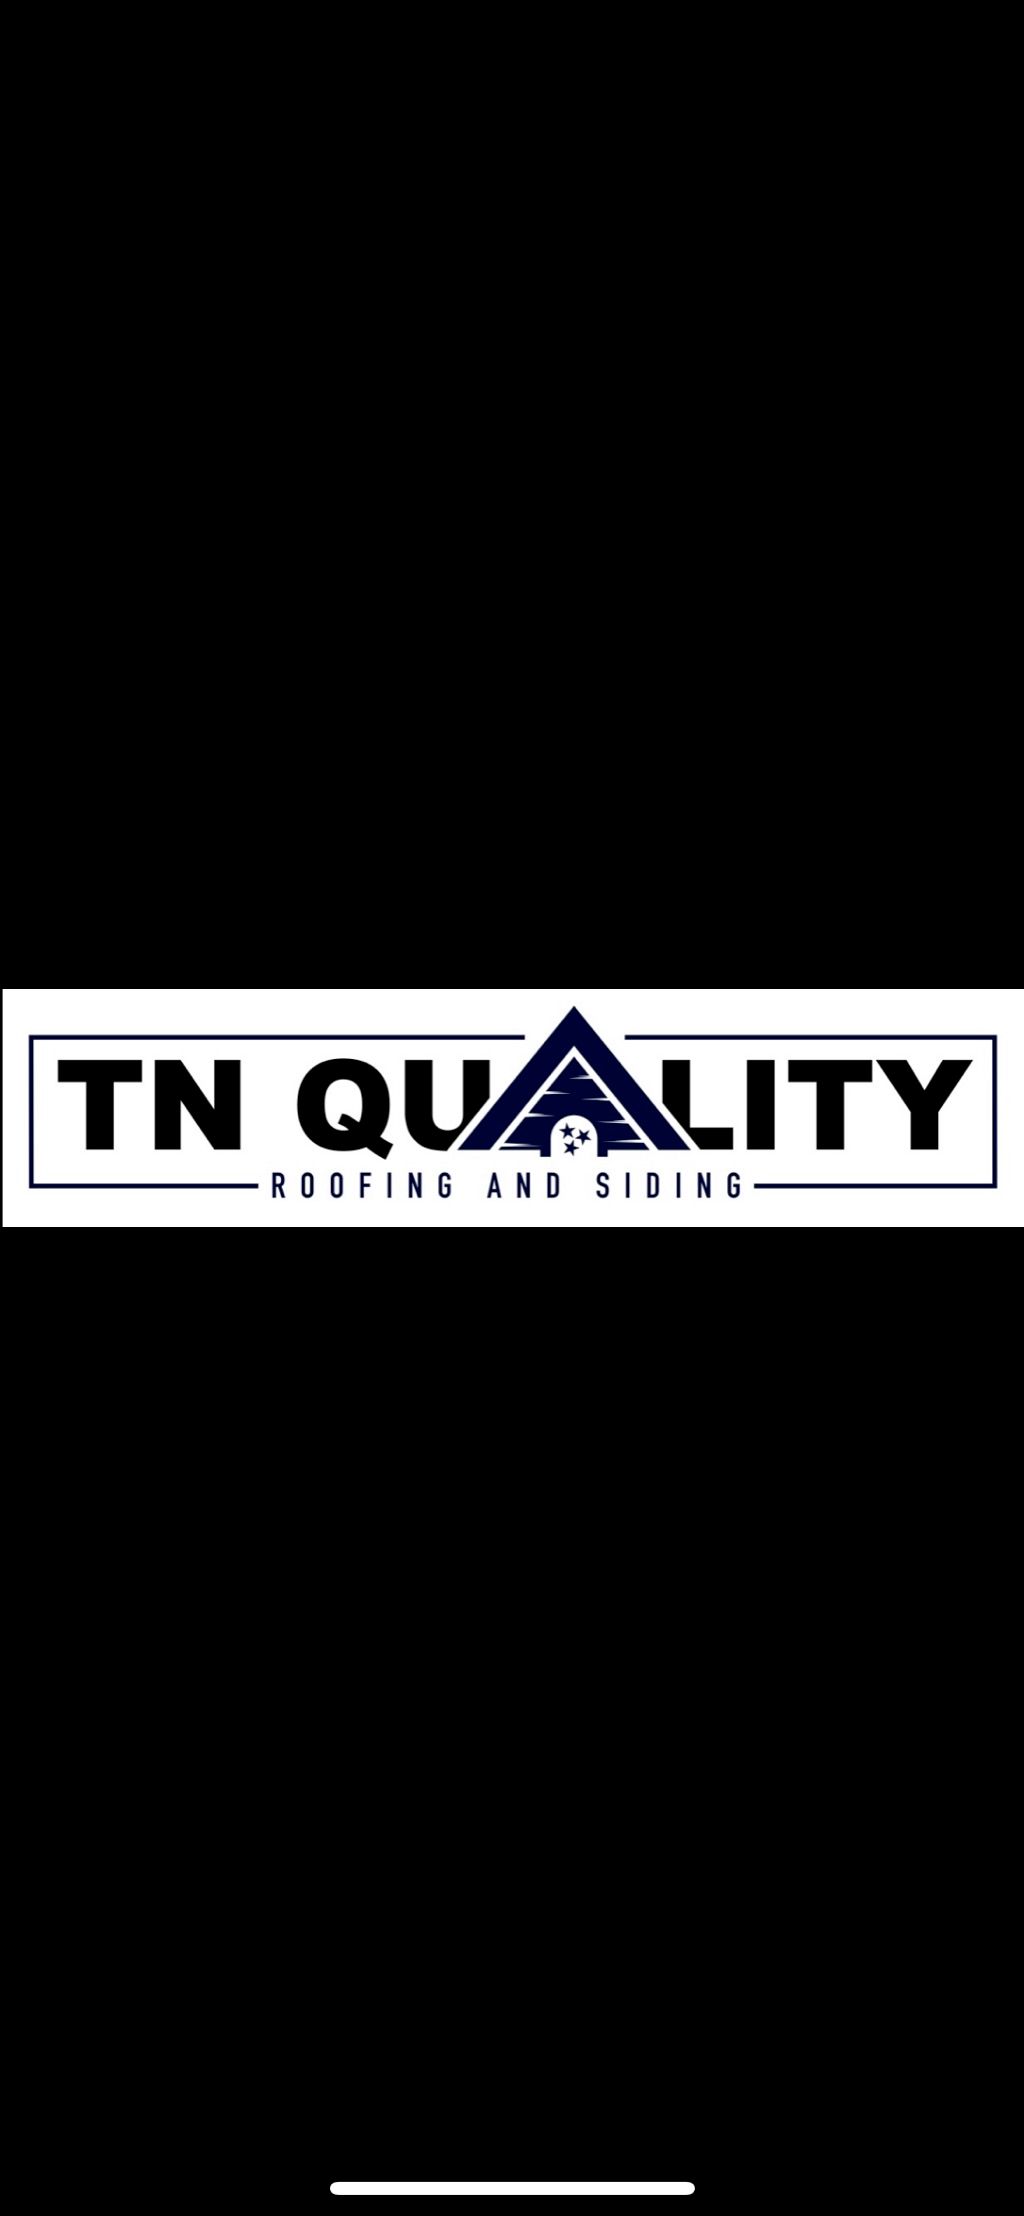 TN Quality Roofing & Siding